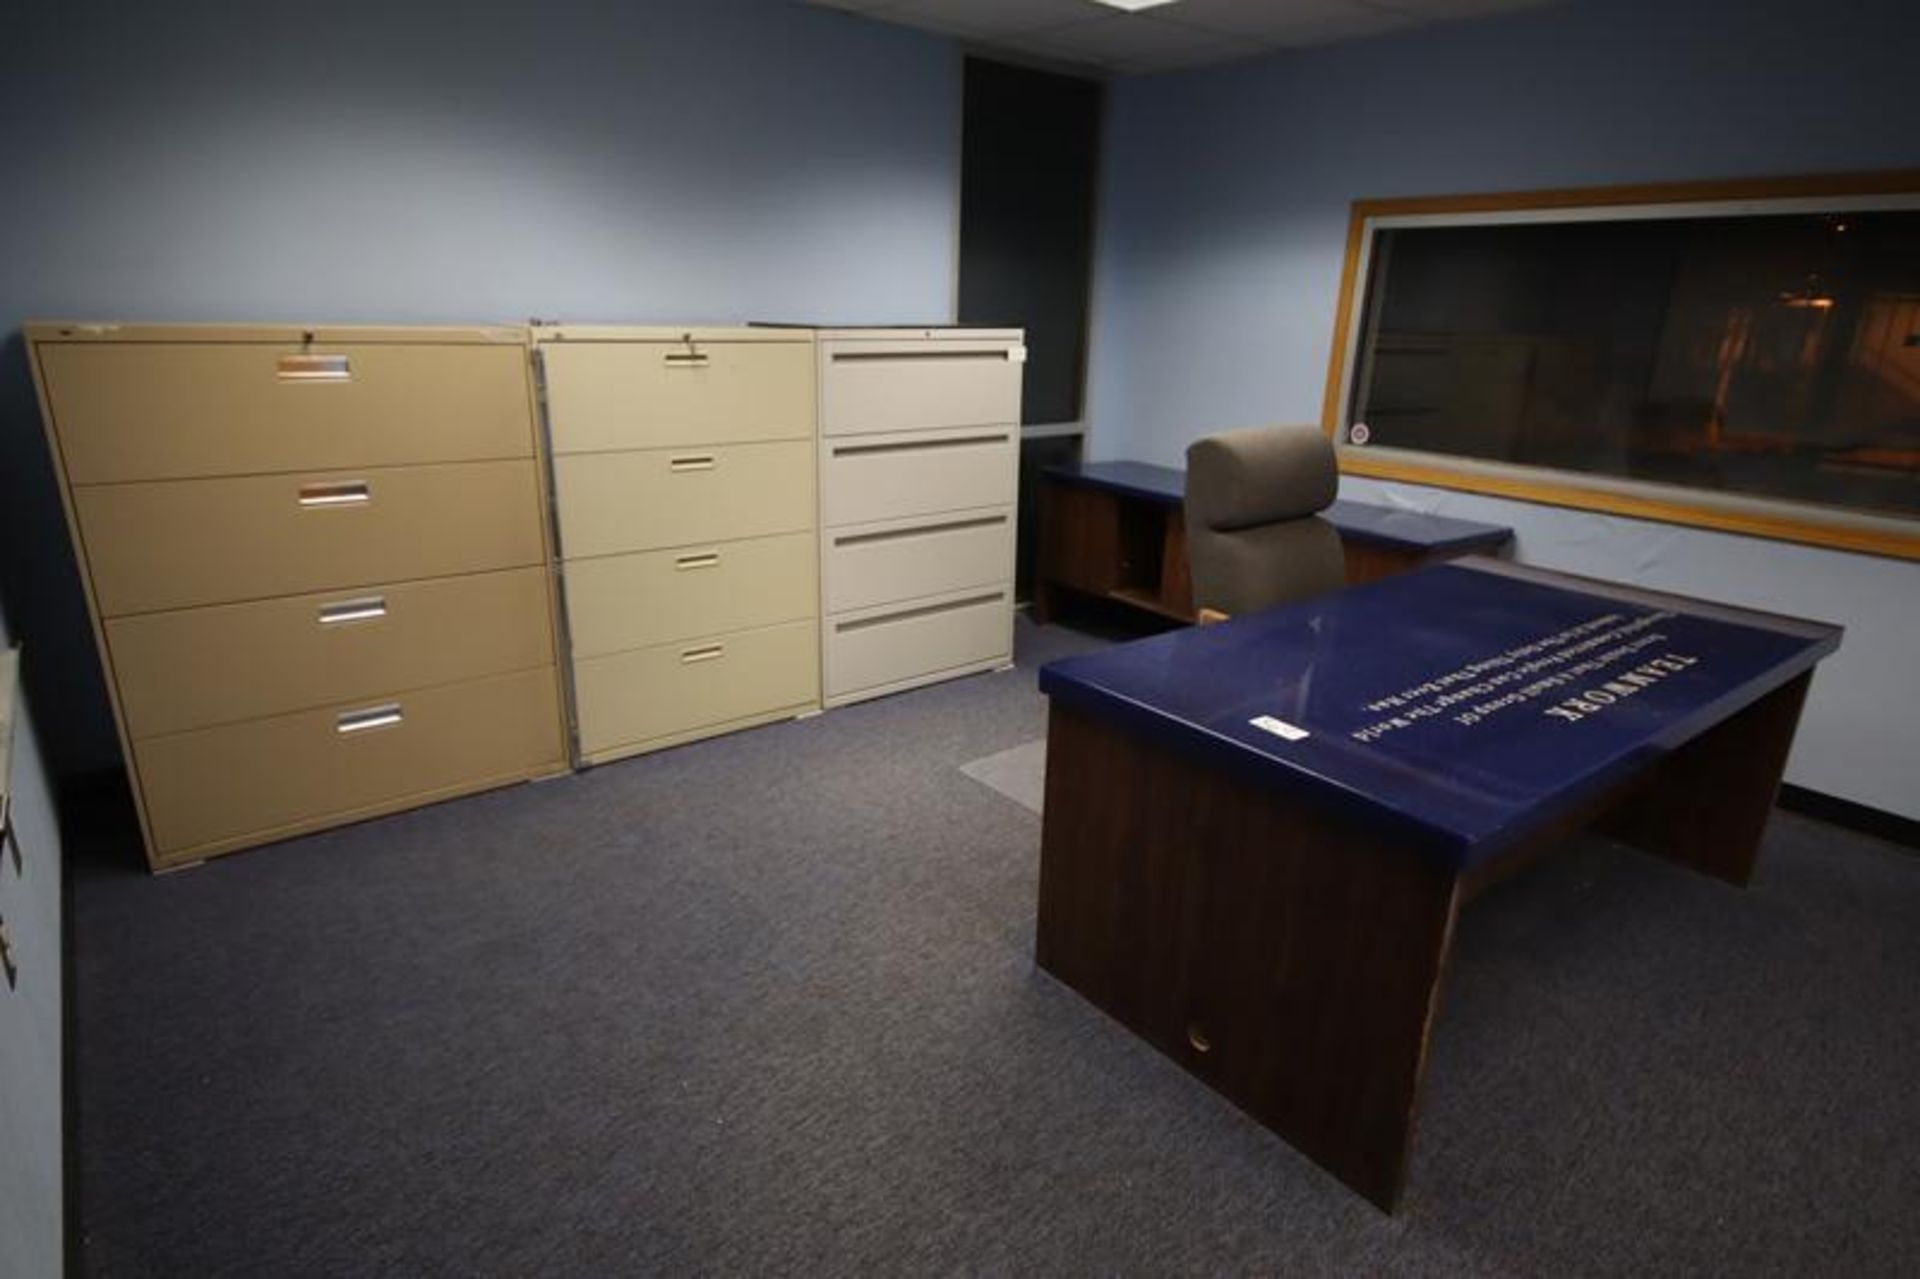 (3) Lateral 4-Drawer Files, Desk, Cradenza, Conference Table, (4) Chairs, Eraser Board, (Room 201) - Image 3 of 5